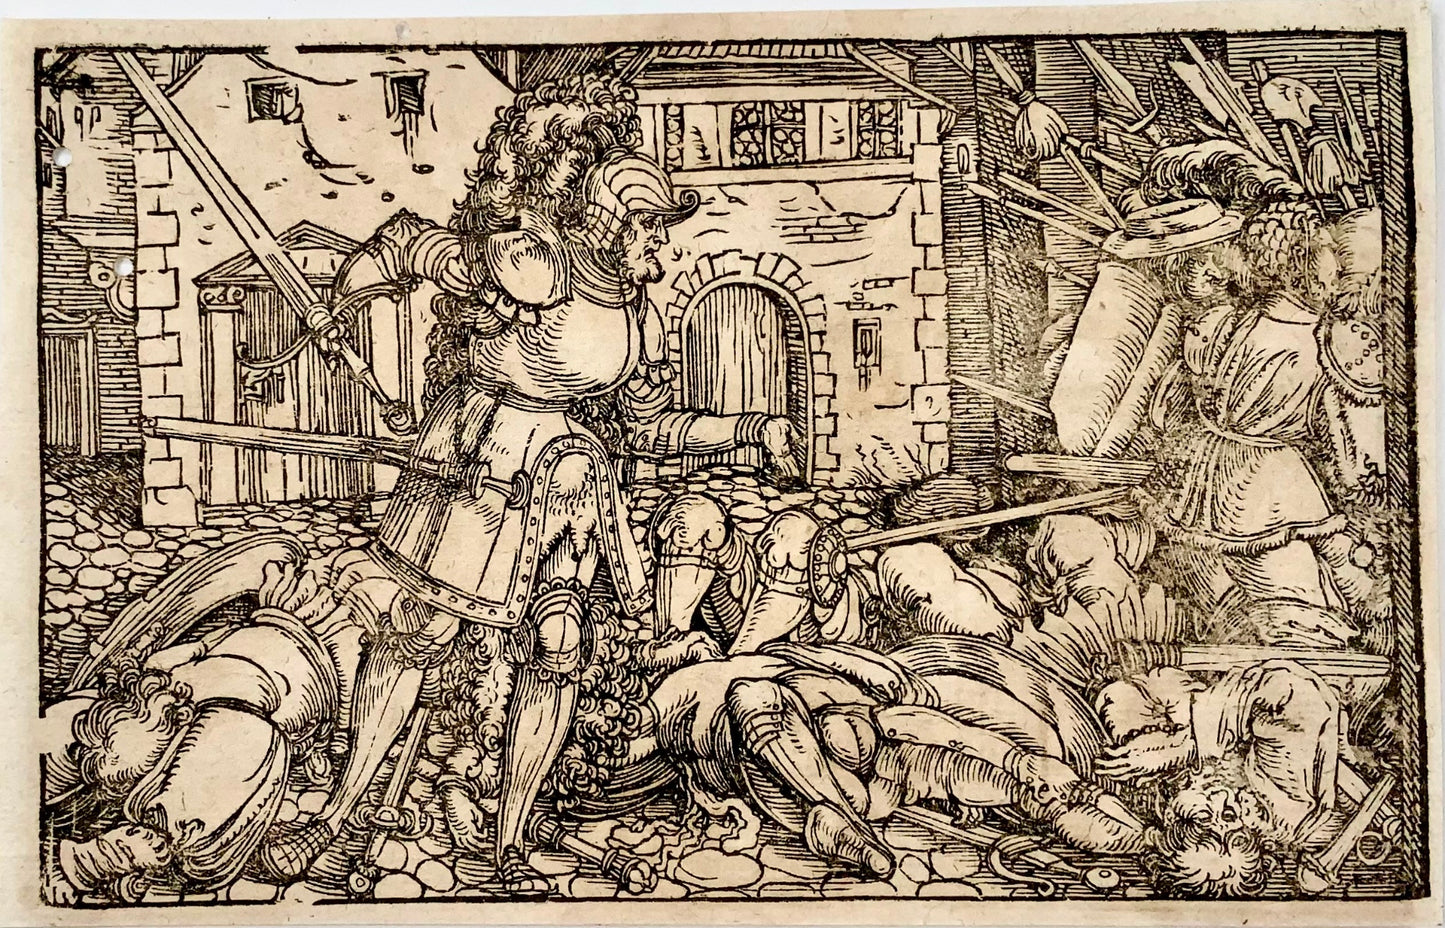 1532 Hans Weiditz, Battle with / Death of an Enemy, 2 master woodcuts